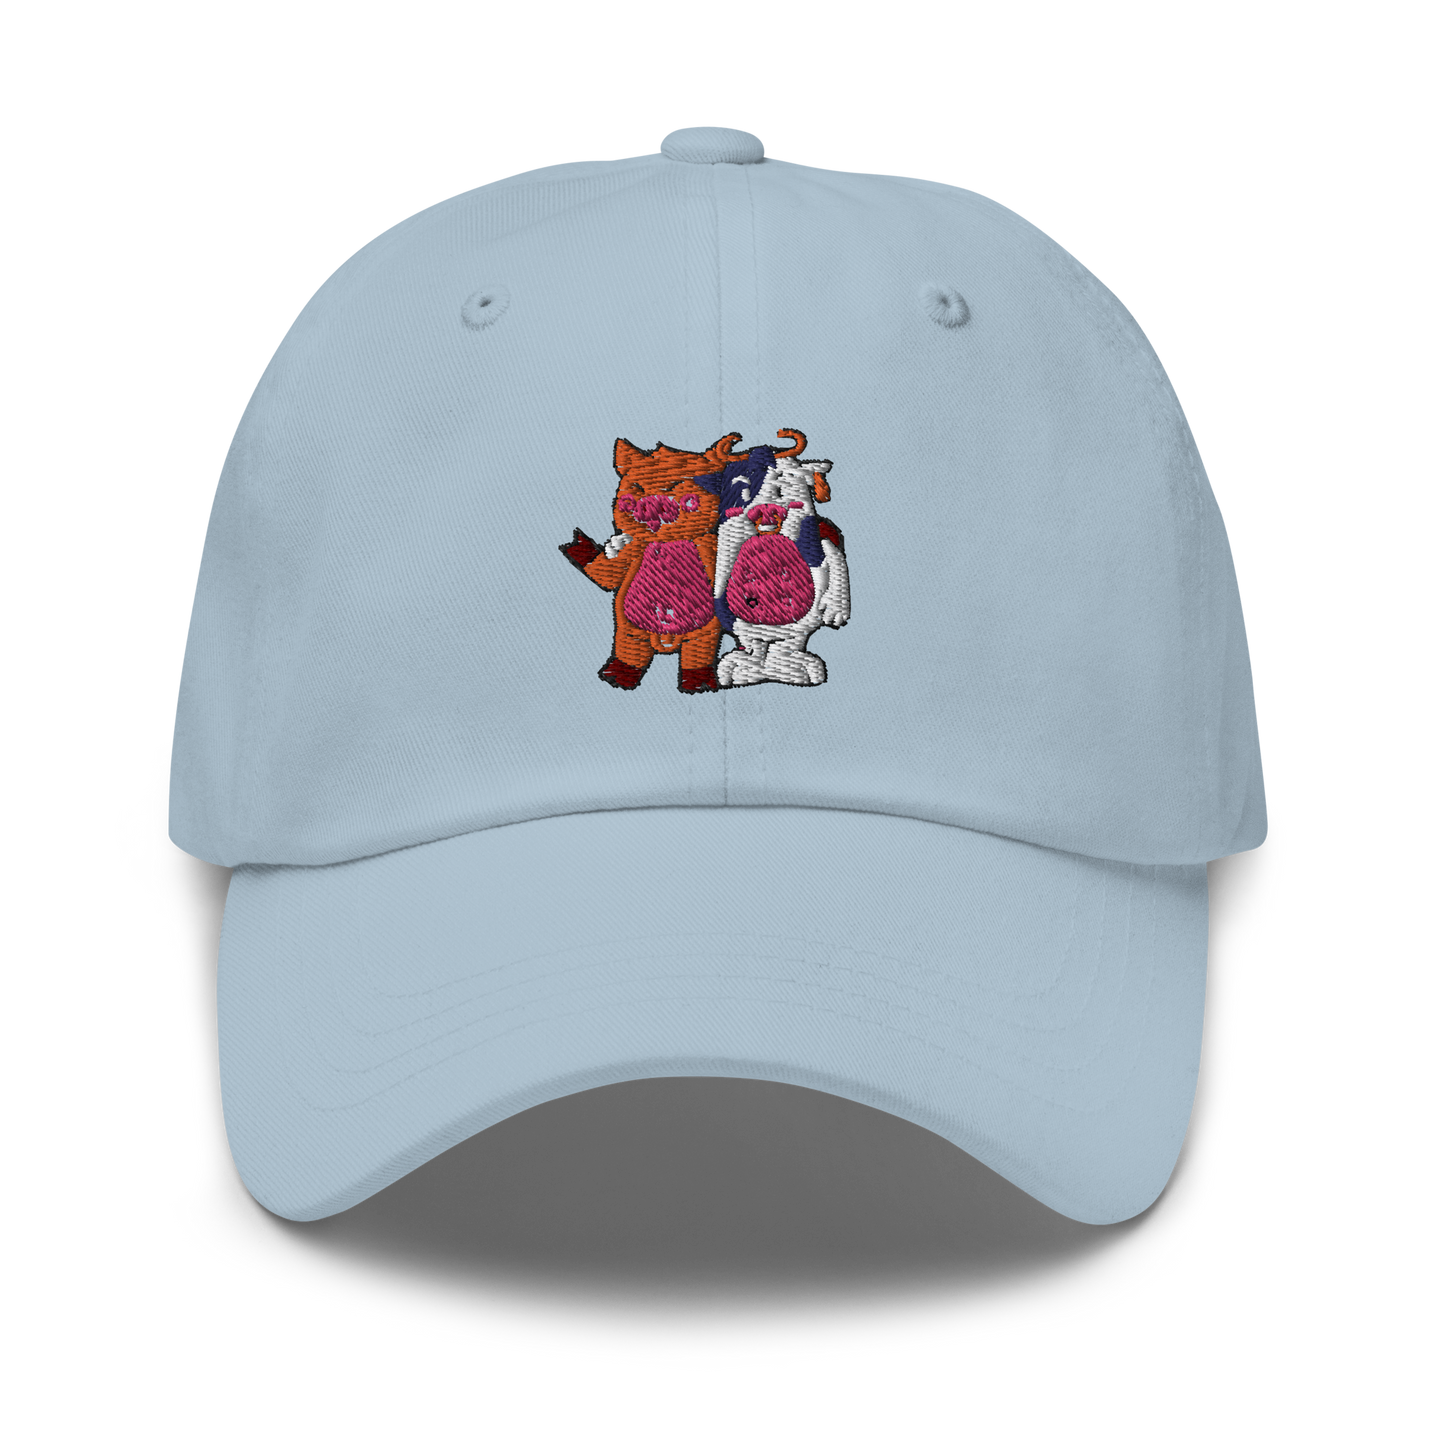 BORN TO BE FRIENDS DAD HAT